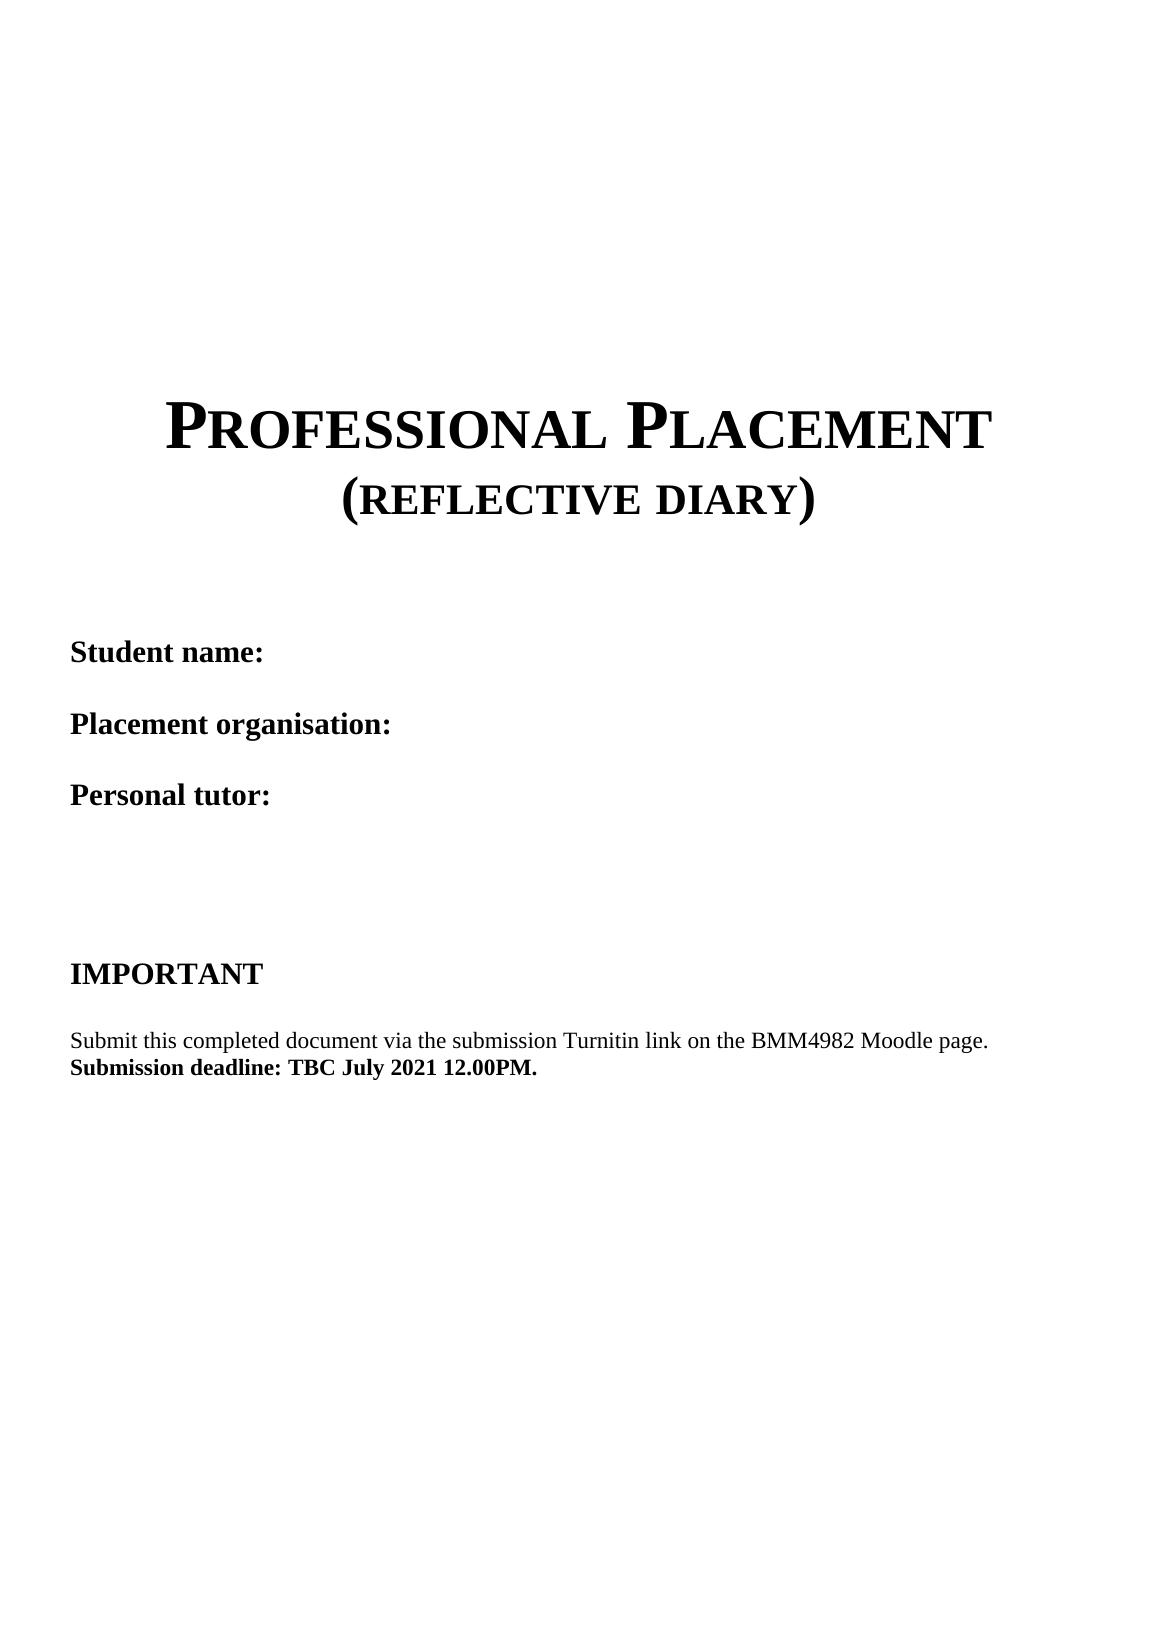 Professional Placement Reflective Diary_1